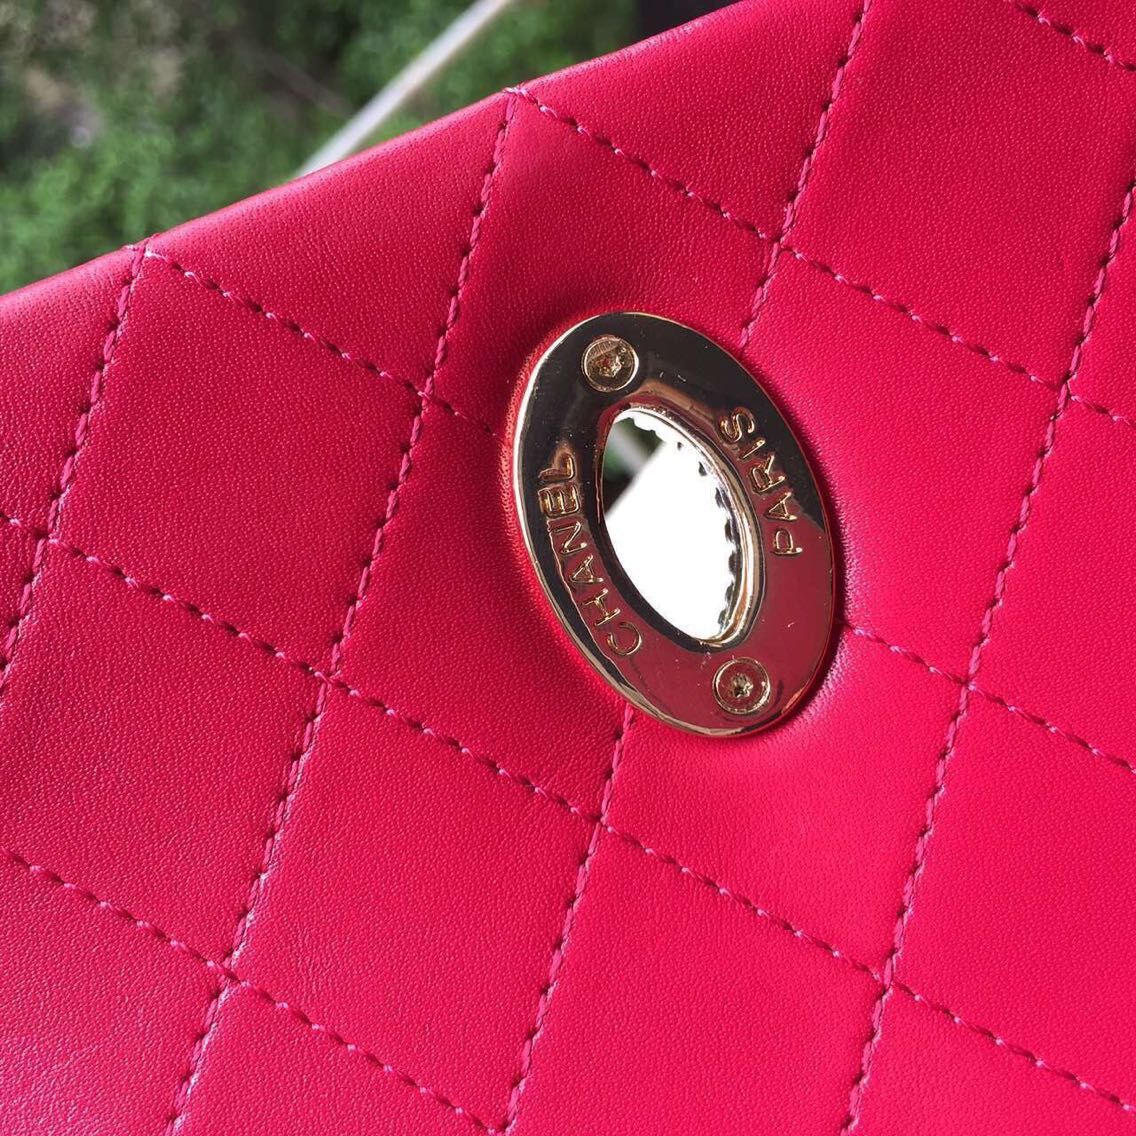 Chanel 2.55 Series Flap Bags Original Snake Leather A1112 Red